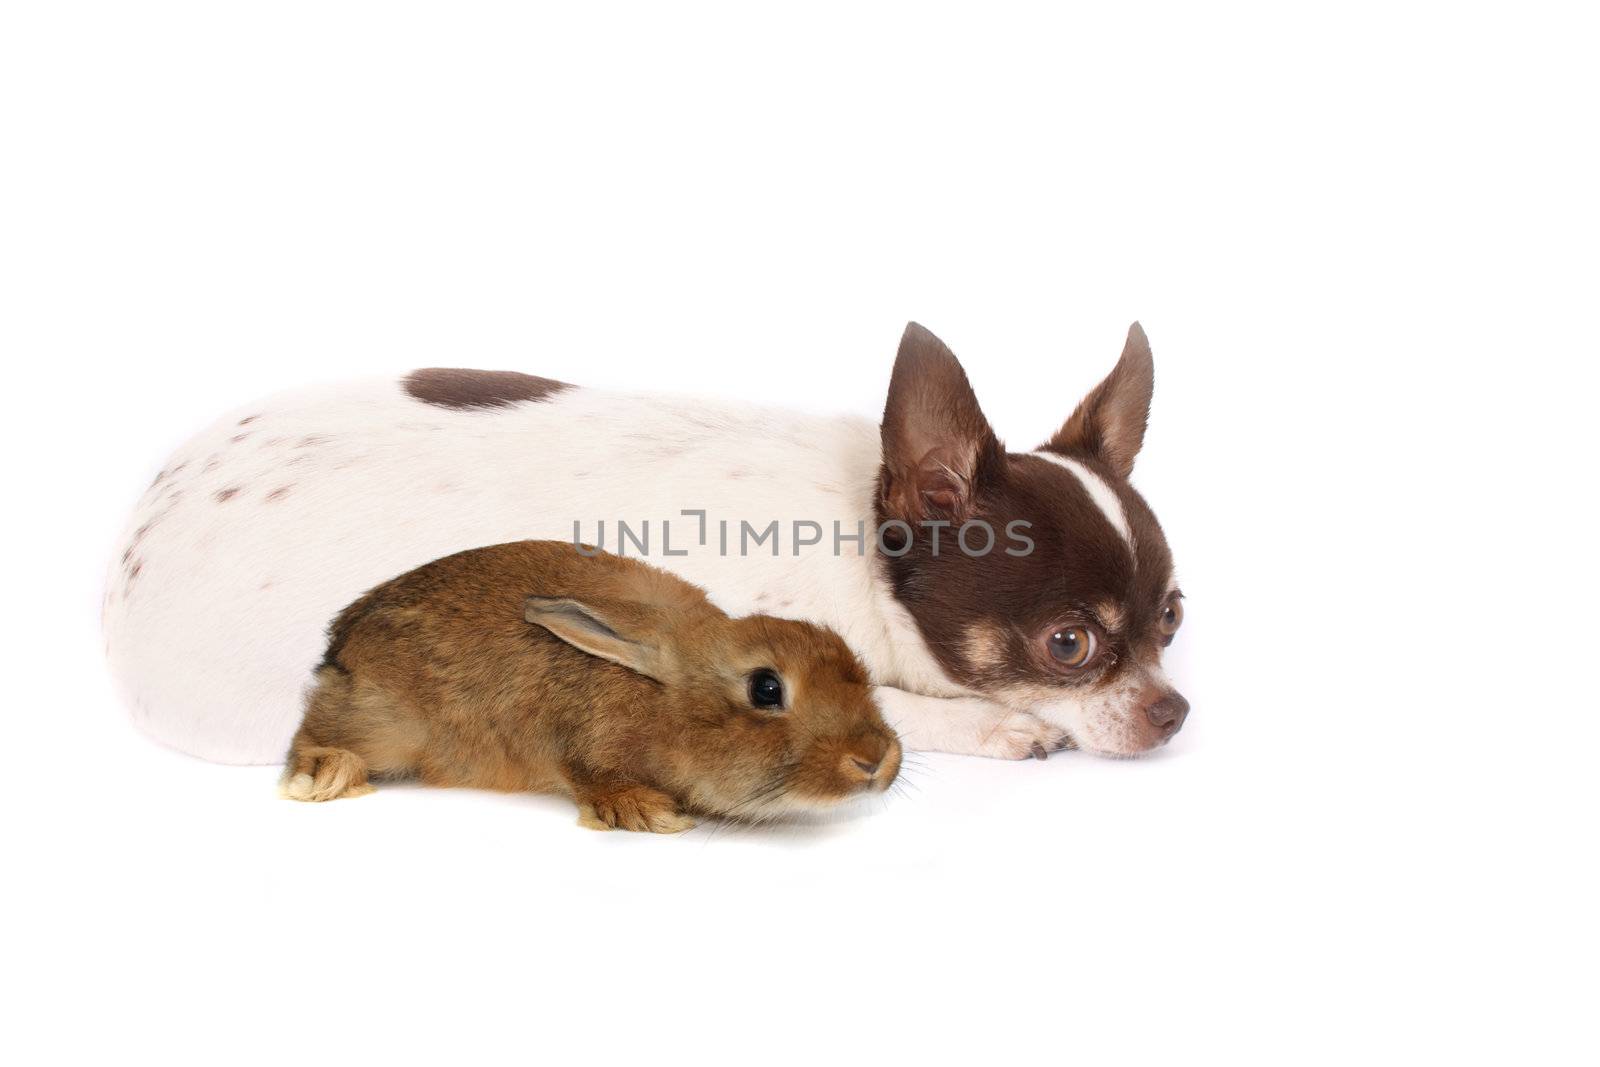 chihuahua dog and her friend on the white background